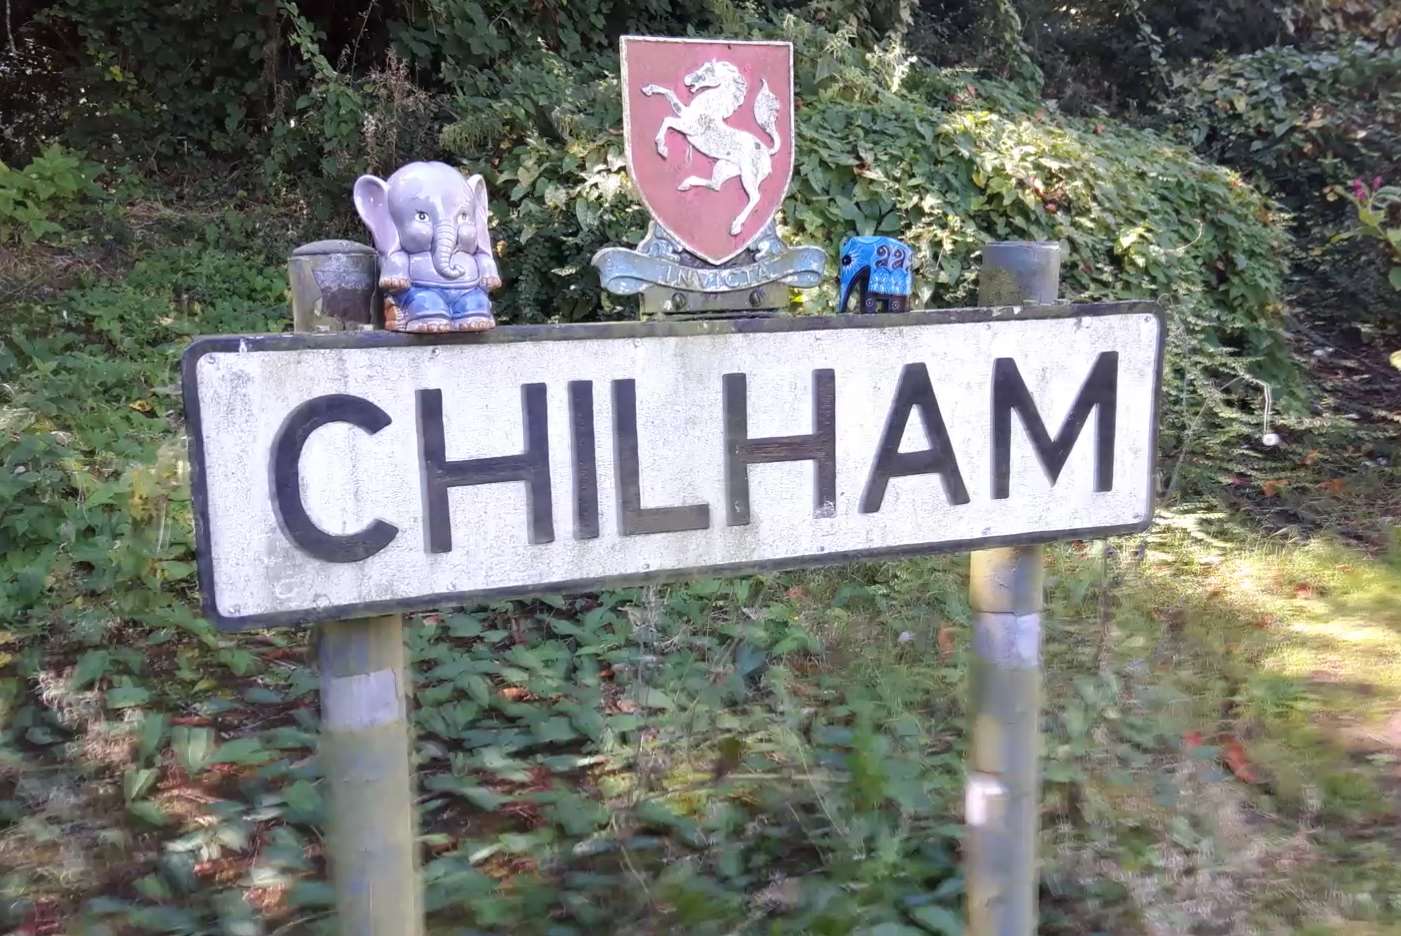 The Chilham sign has a number of the elephants around it.